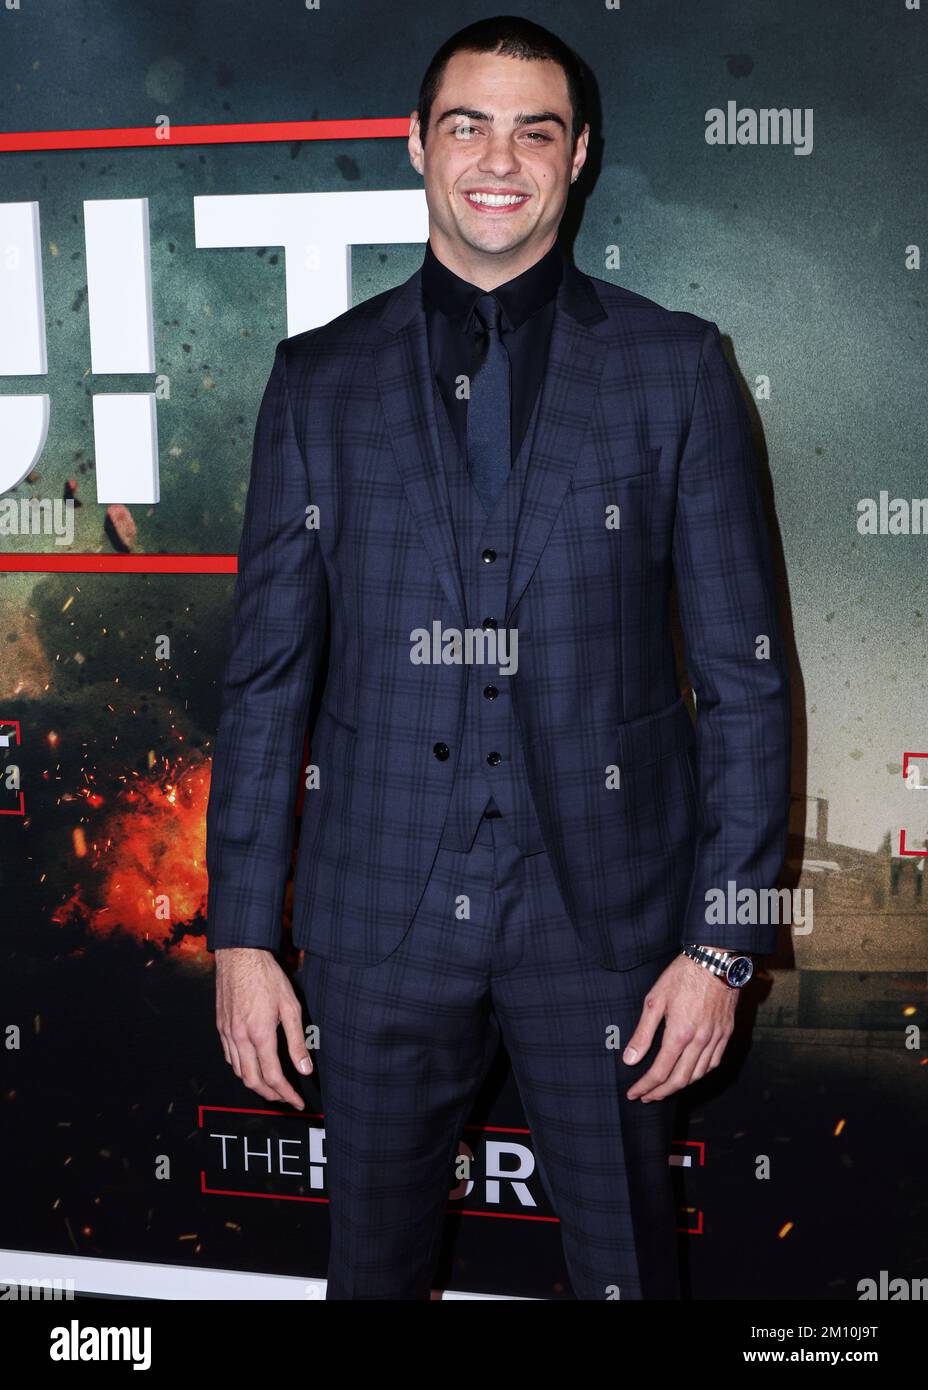 Los Angeles, United States. 08th Dec, 2022. LOS ANGELES, CALIFORNIA, USA - DECEMBER 08: American actor Noah Centineo arrives at the World Premiere Of Netflix's 'The Recruit' Season 1 held at AMC The Grove 14 on December 8, 2022 in Los Angeles, California, United States. (Photo by Rudy Torres/Image Press Agency) Credit: Image Press Agency/Alamy Live News Stock Photo